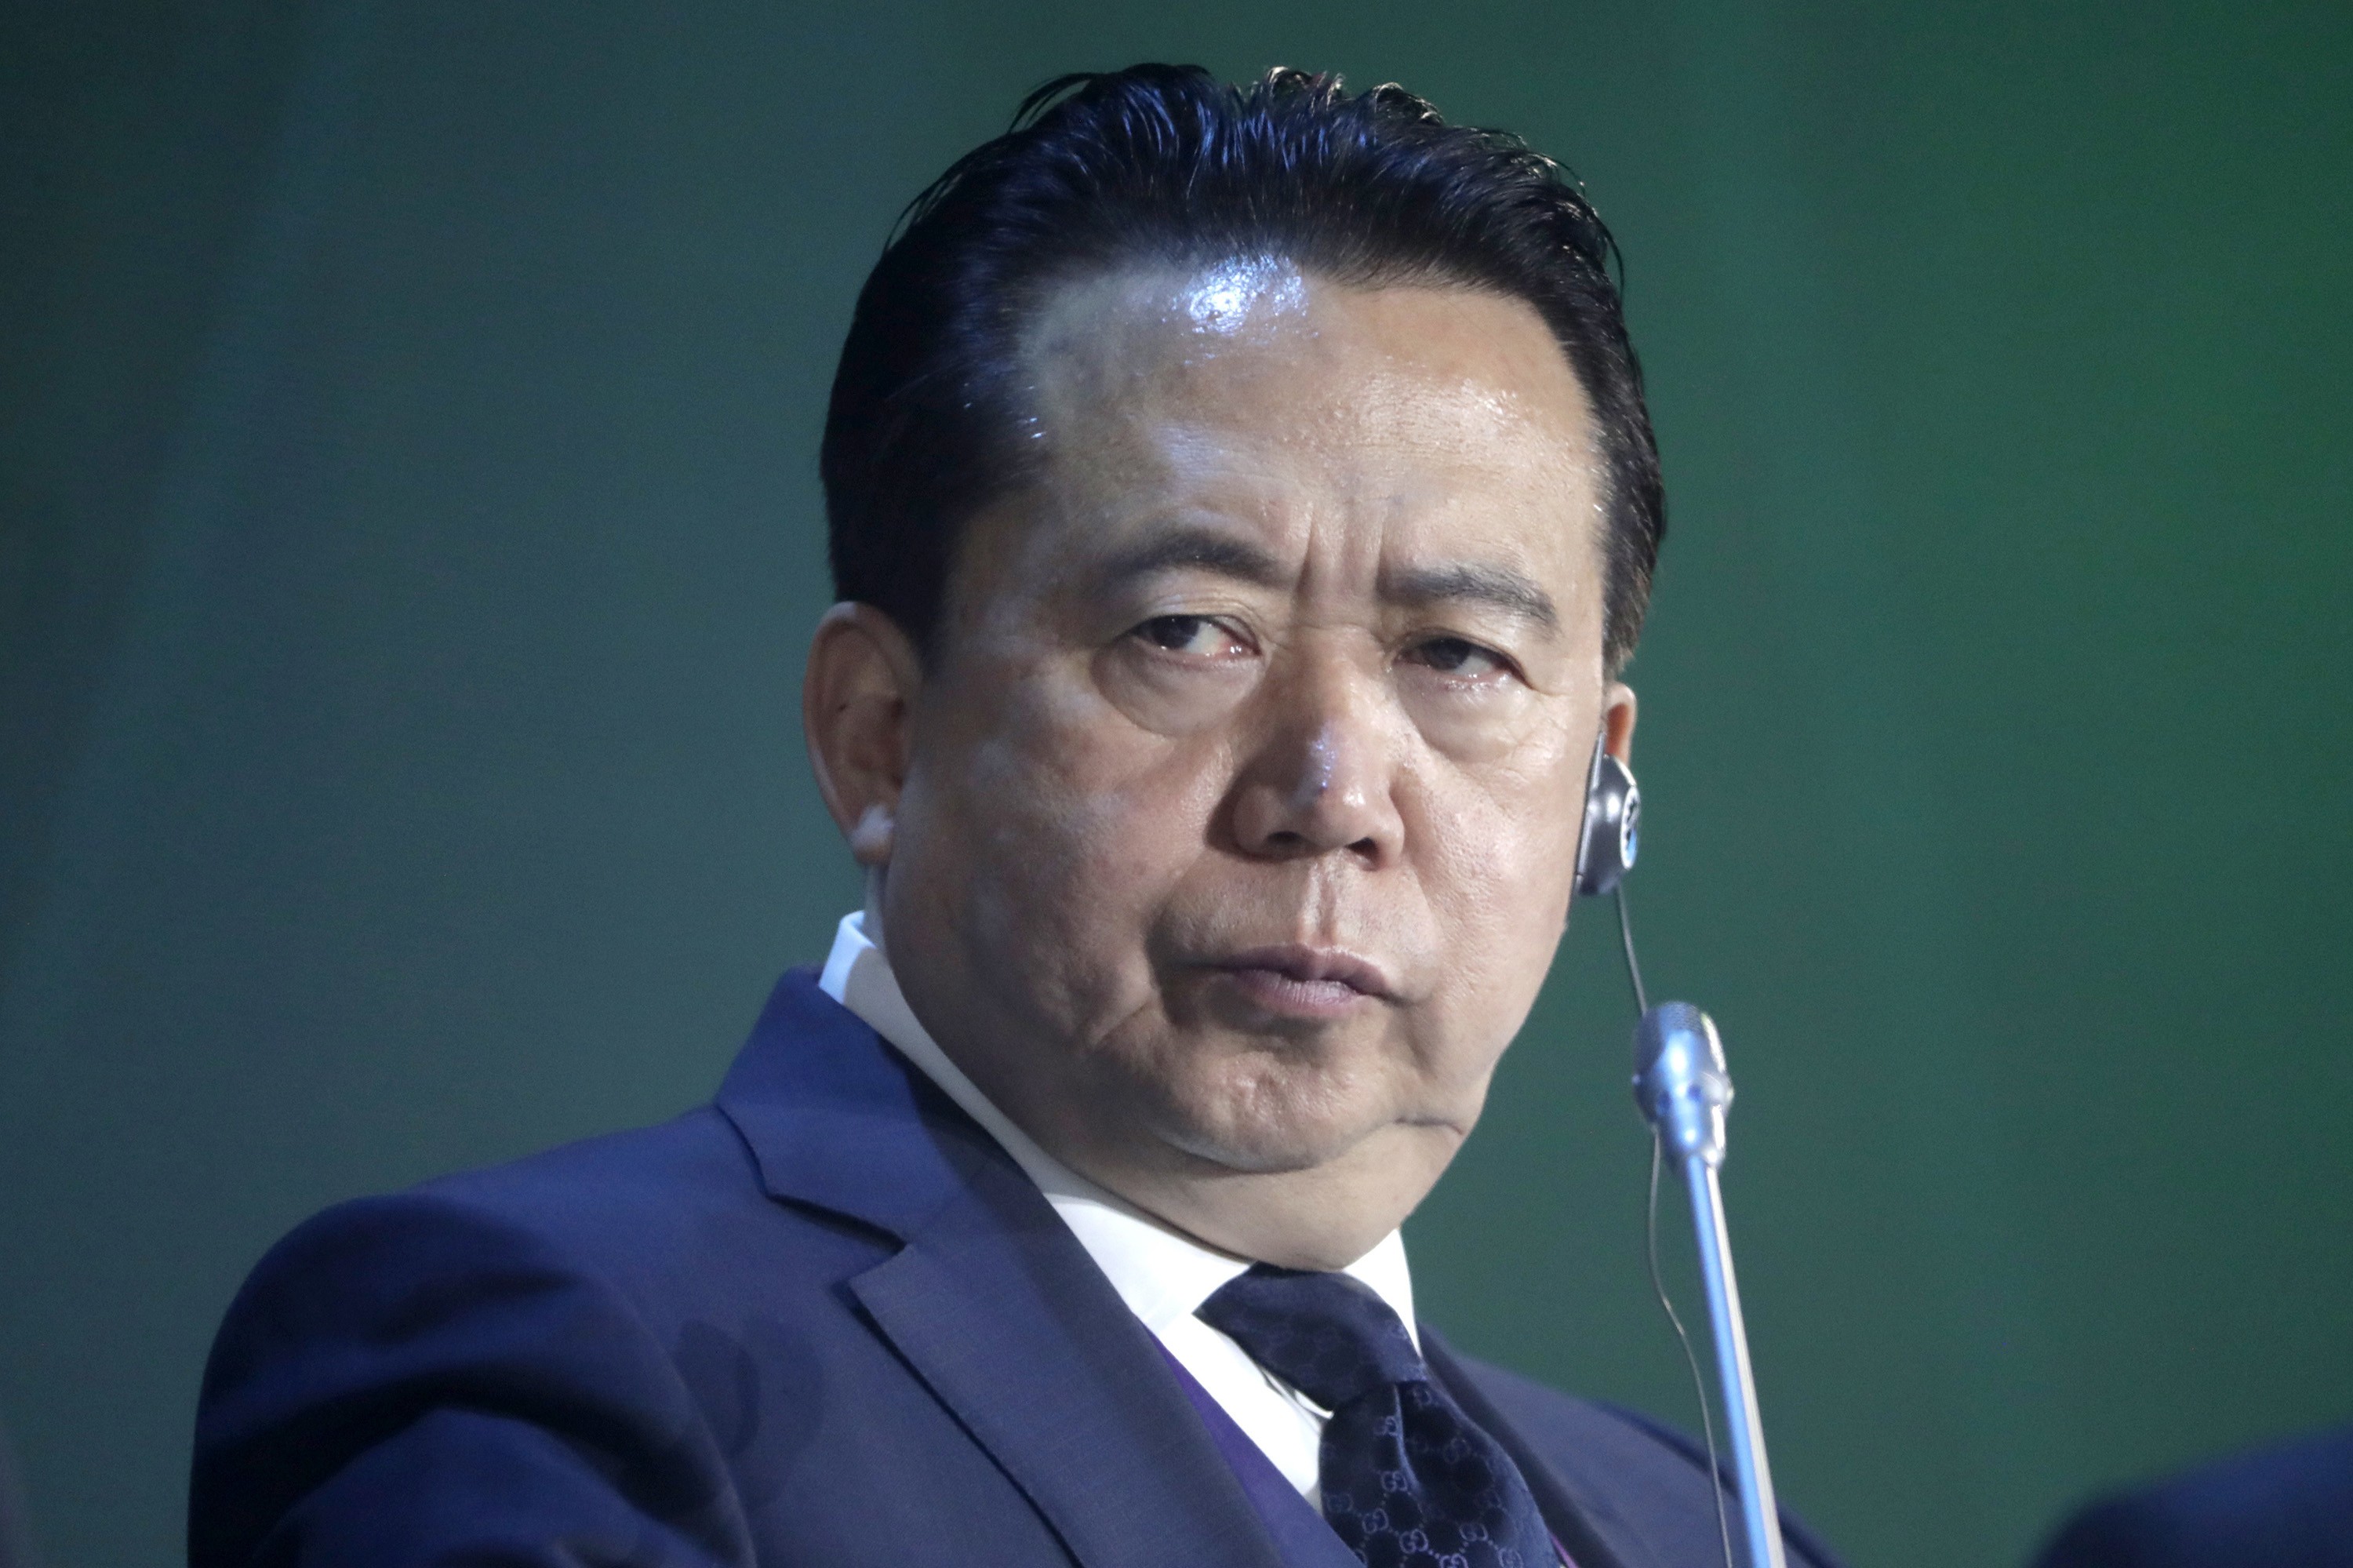 Beijing confirmed on Sunday it is holding Interpol President Meng Hongwei on suspicion of corruption. Photo: TNS